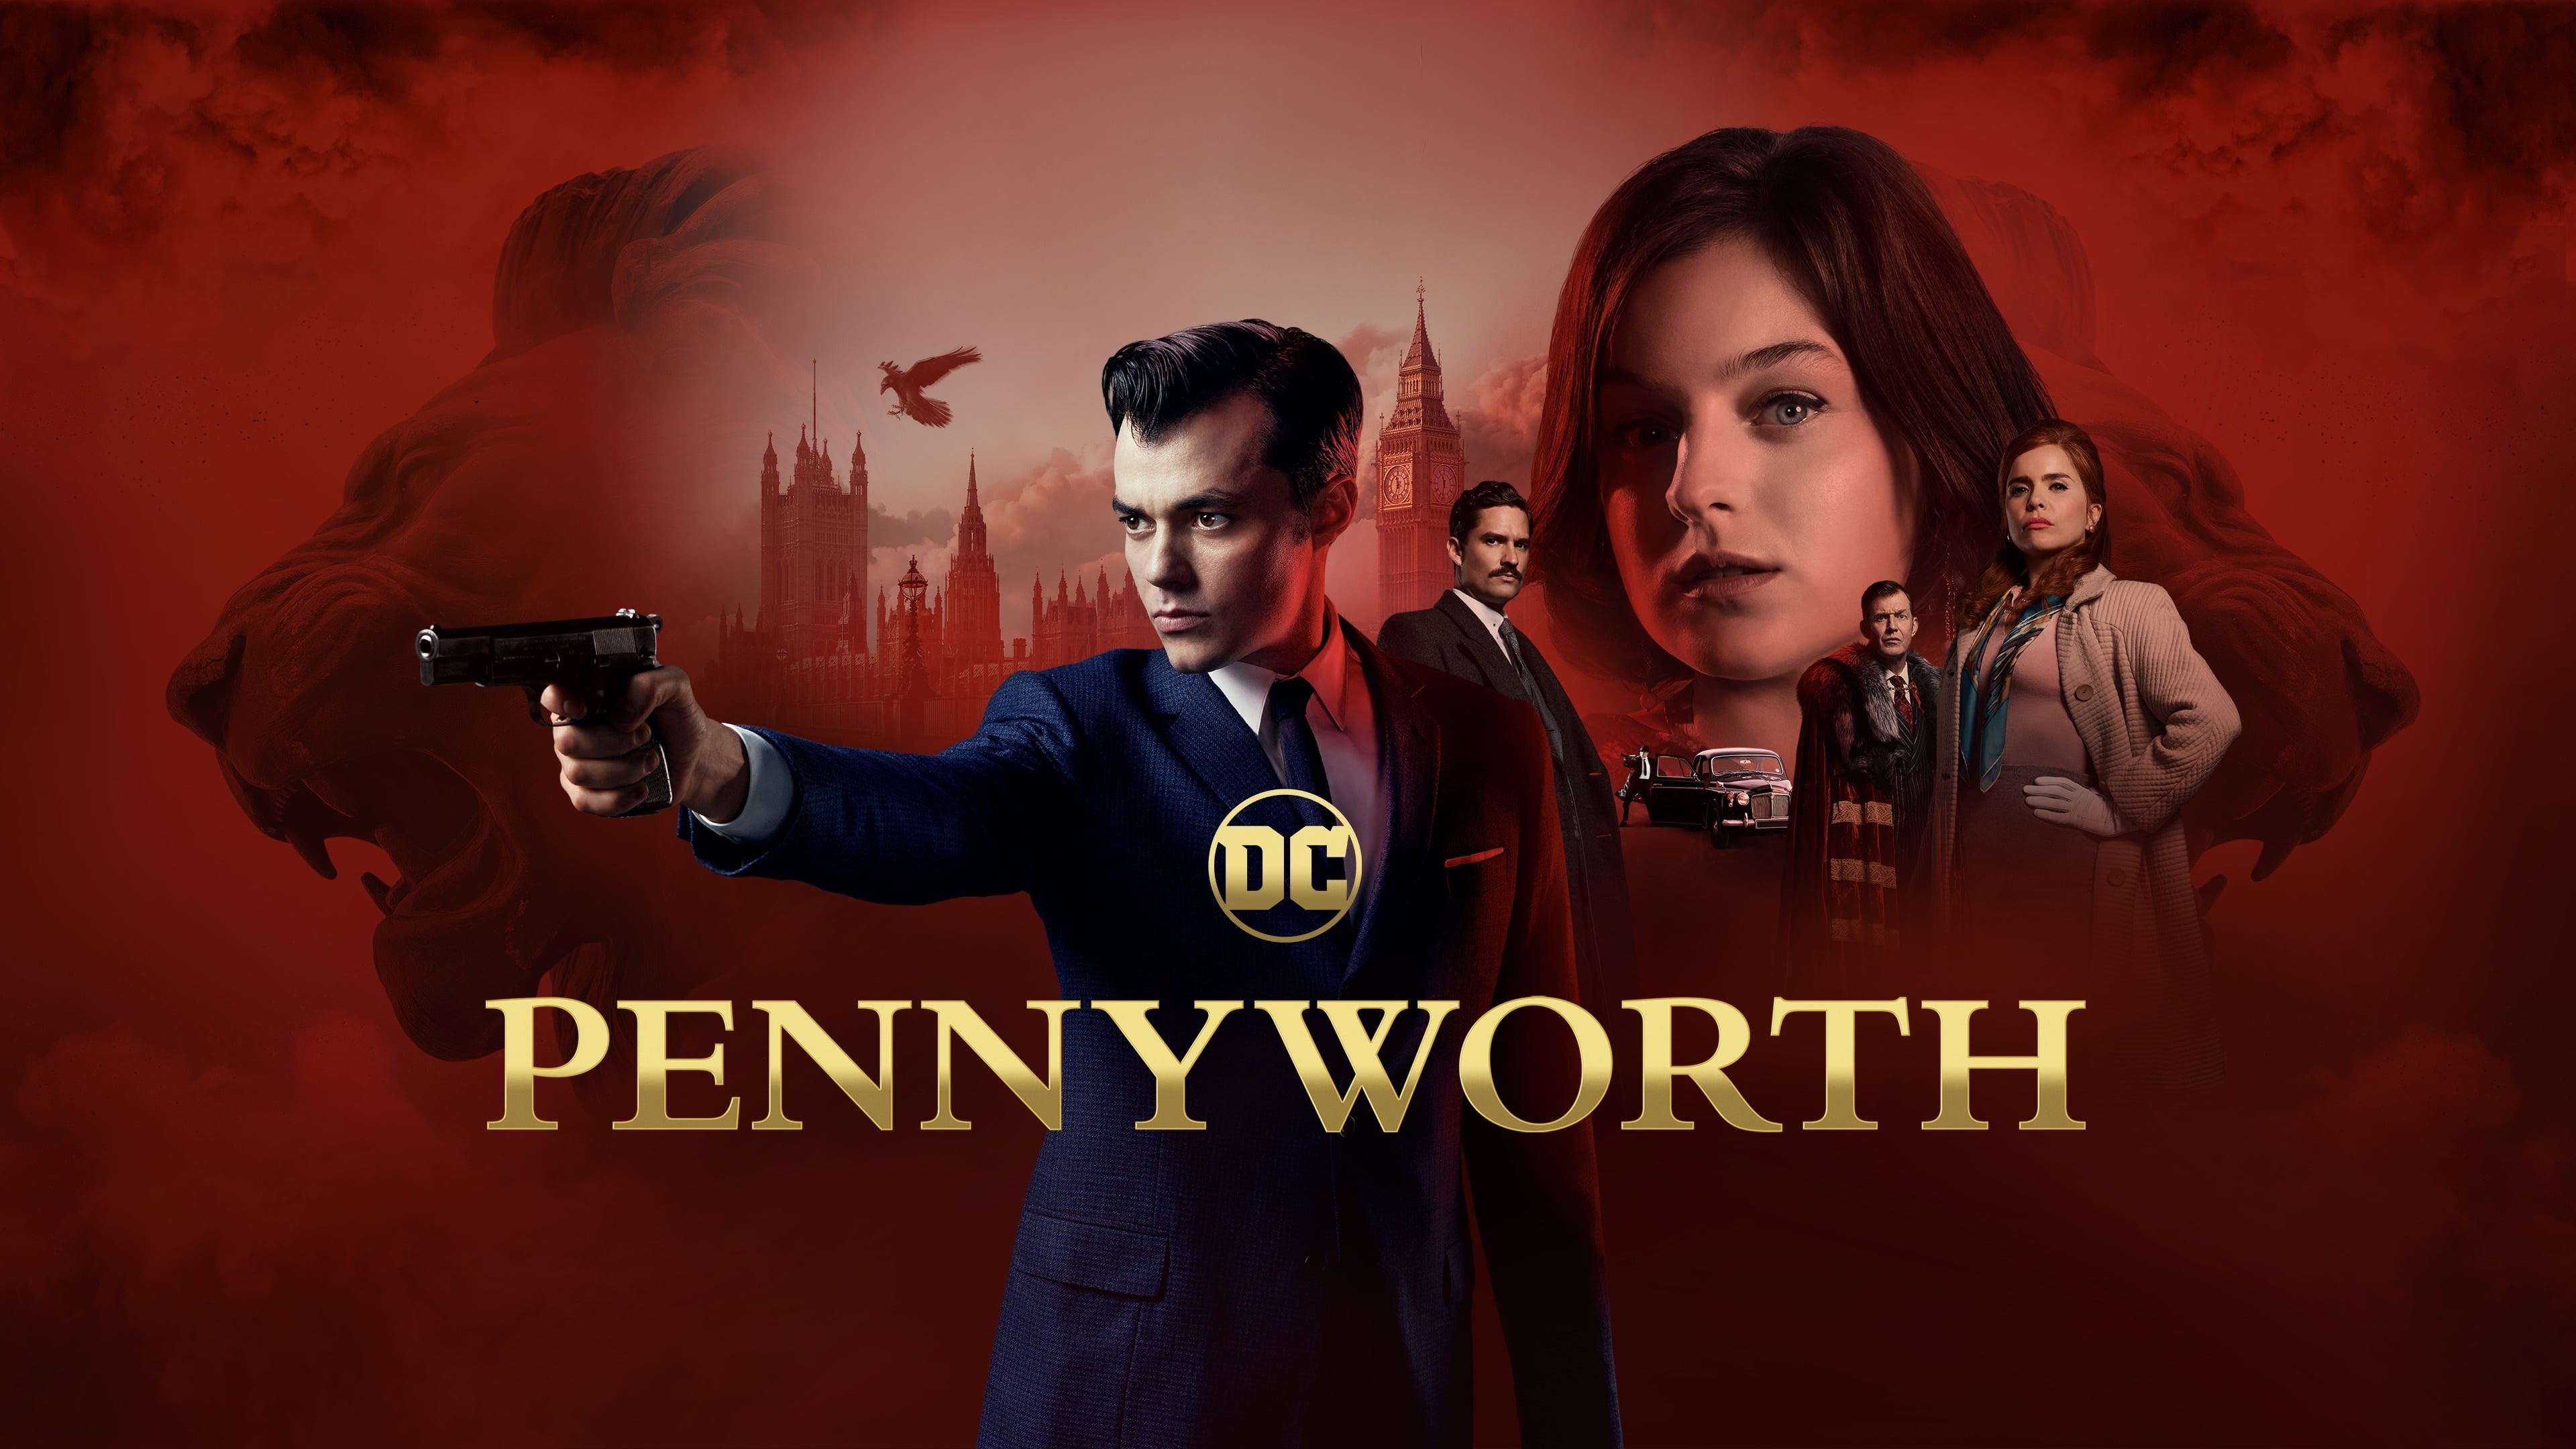 Pennyworth, HD wallpapers, High-quality backgrounds, 3840x2160 4K Desktop